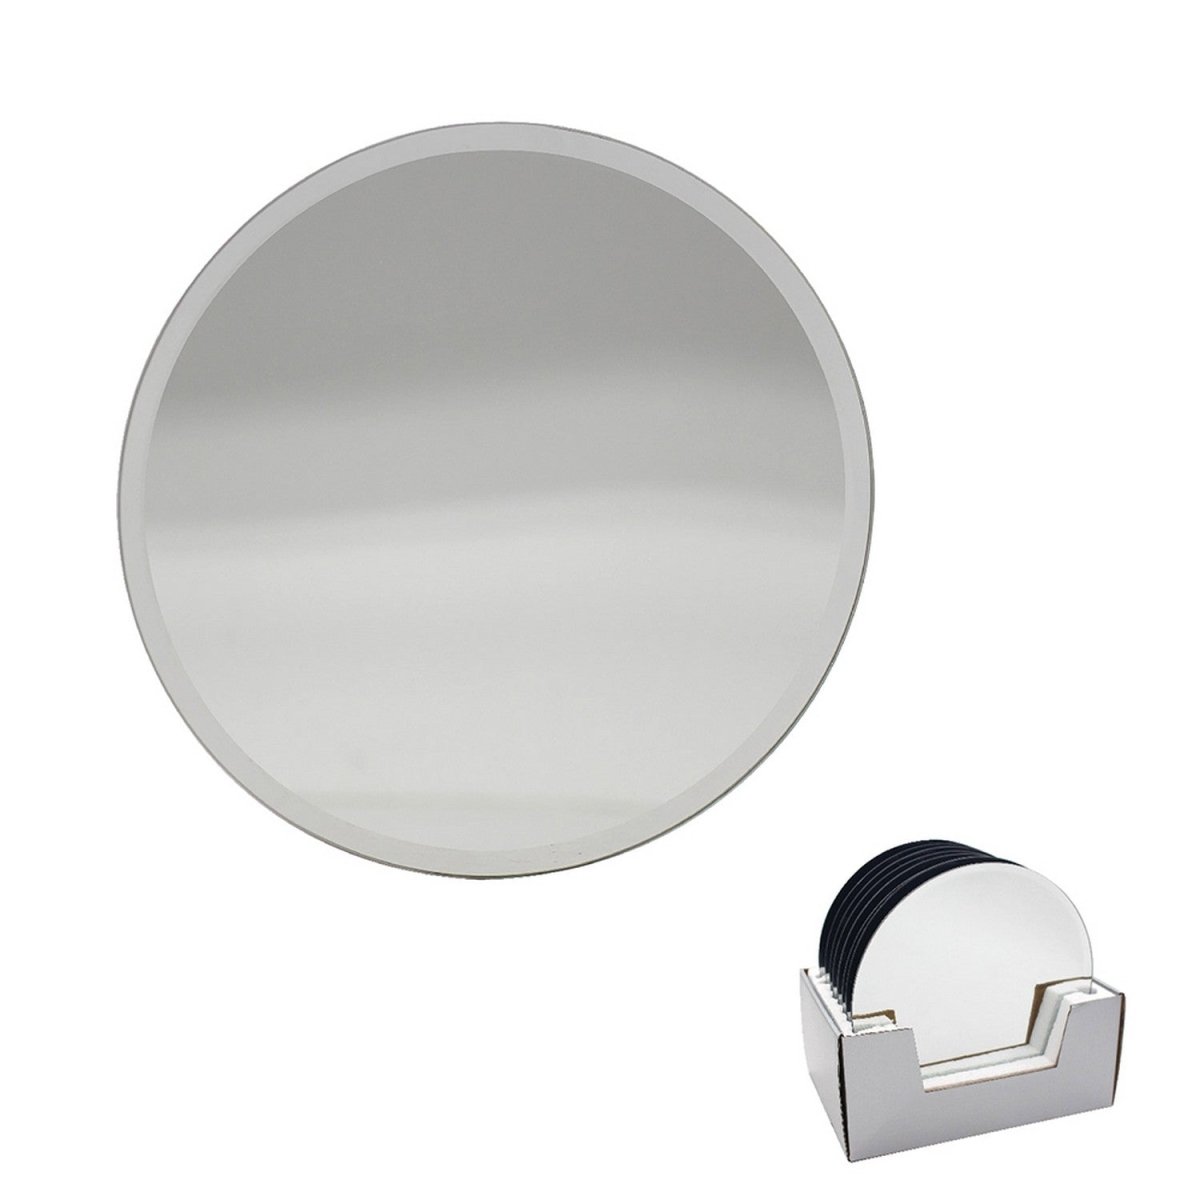 20cm Mirrored Glass Candle Plate - Bonnypack